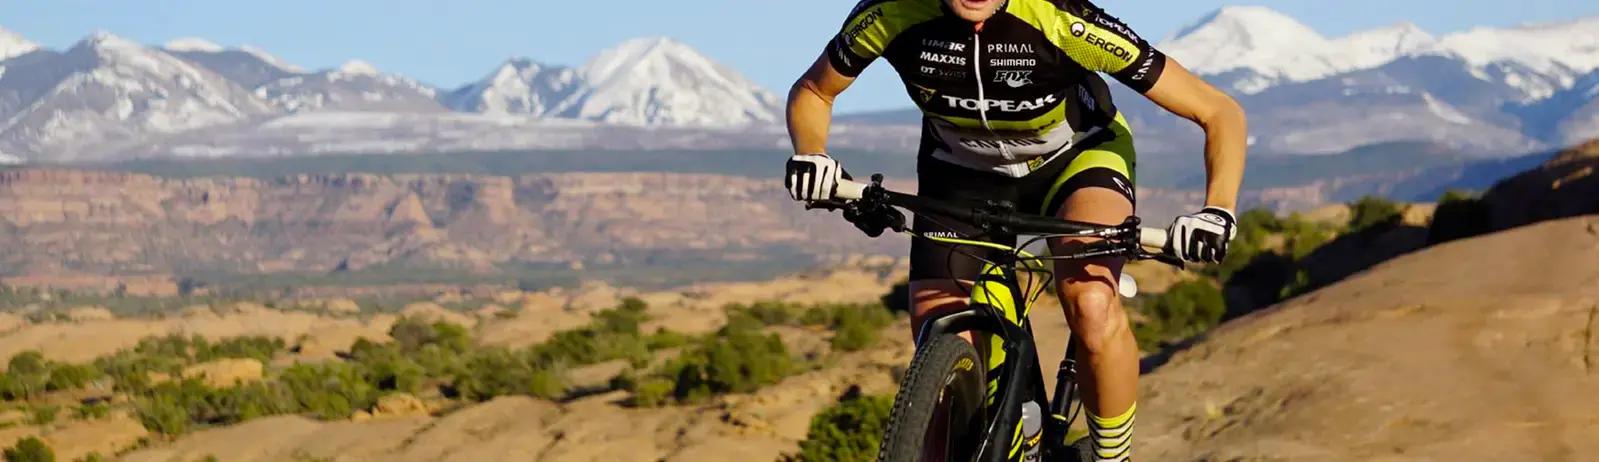 Mountain biker in desert trail with snow capped mountains in background